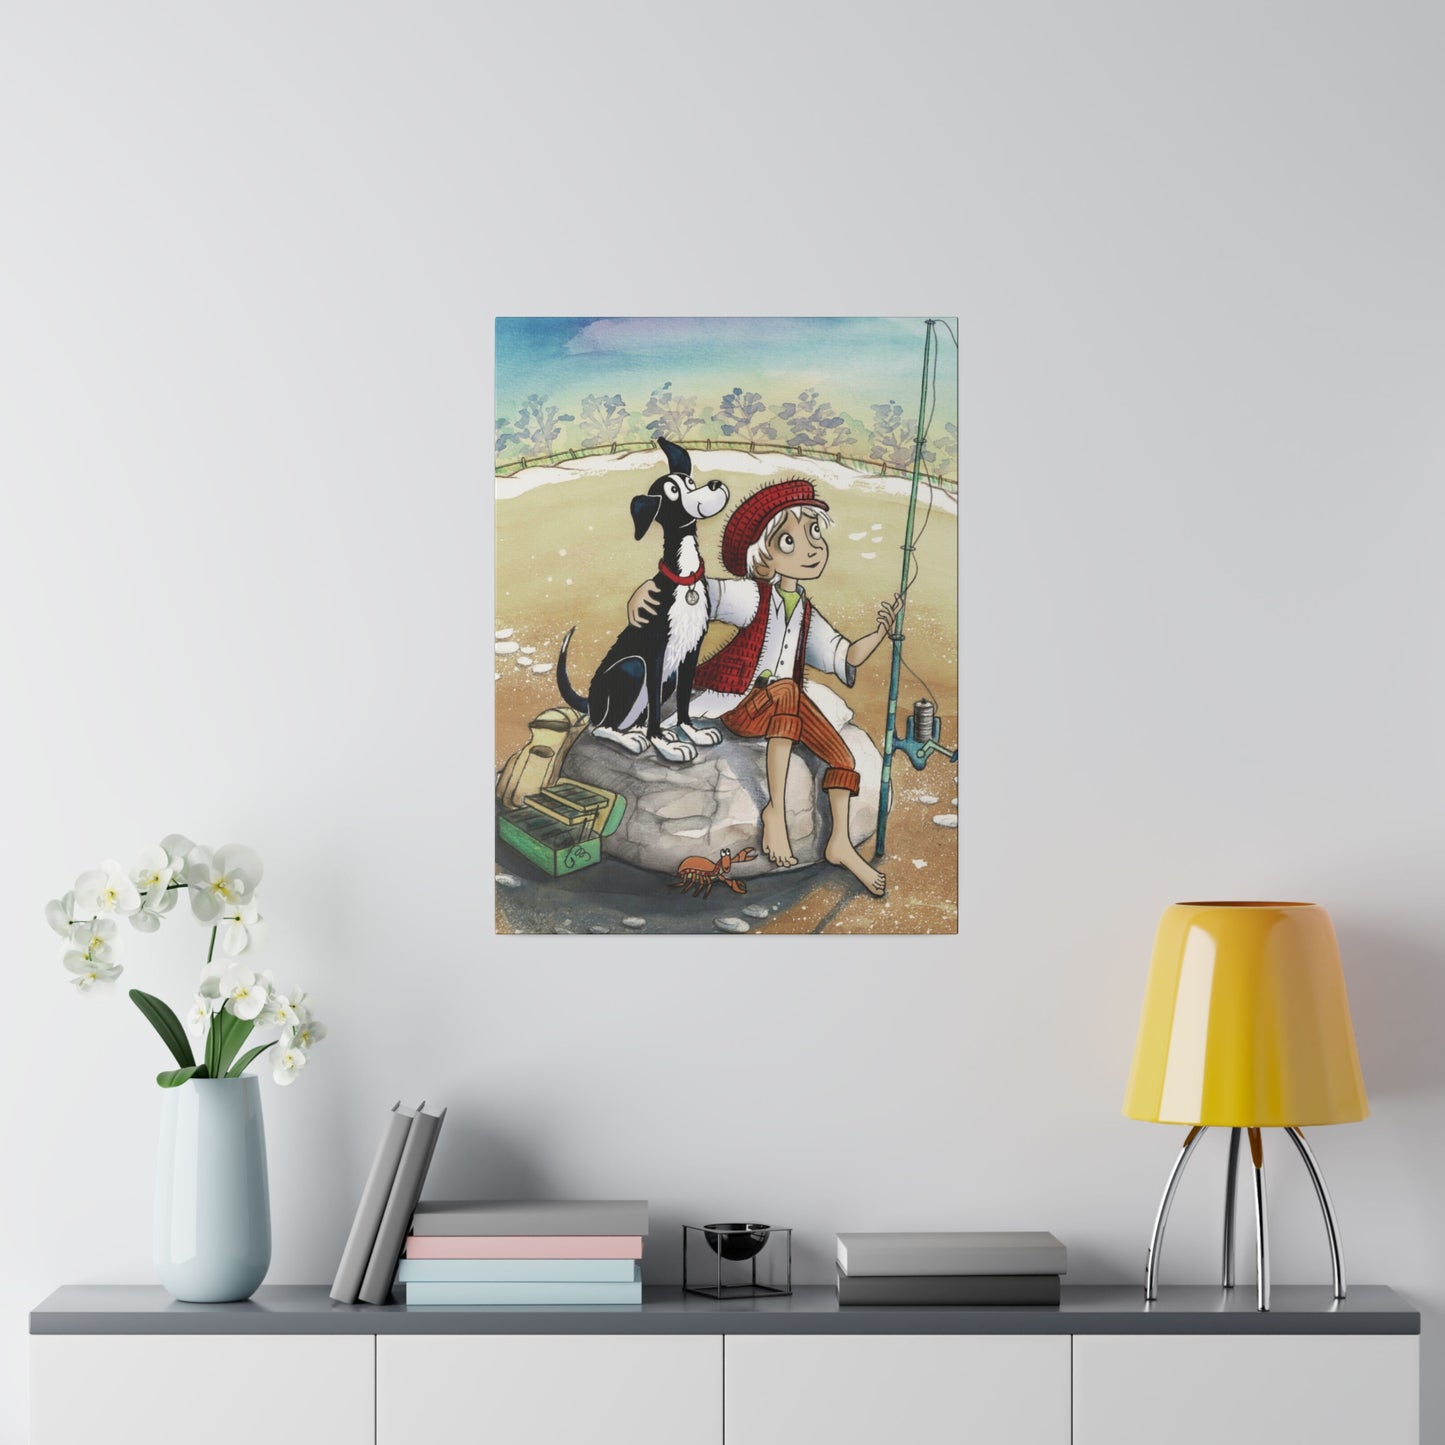 A 24" x 32" 'Dogs Pure Love Fishing' canvas hangs on a wall, above a narrow cabinet, which features a yellow lamp, books, and a vase of flowers.